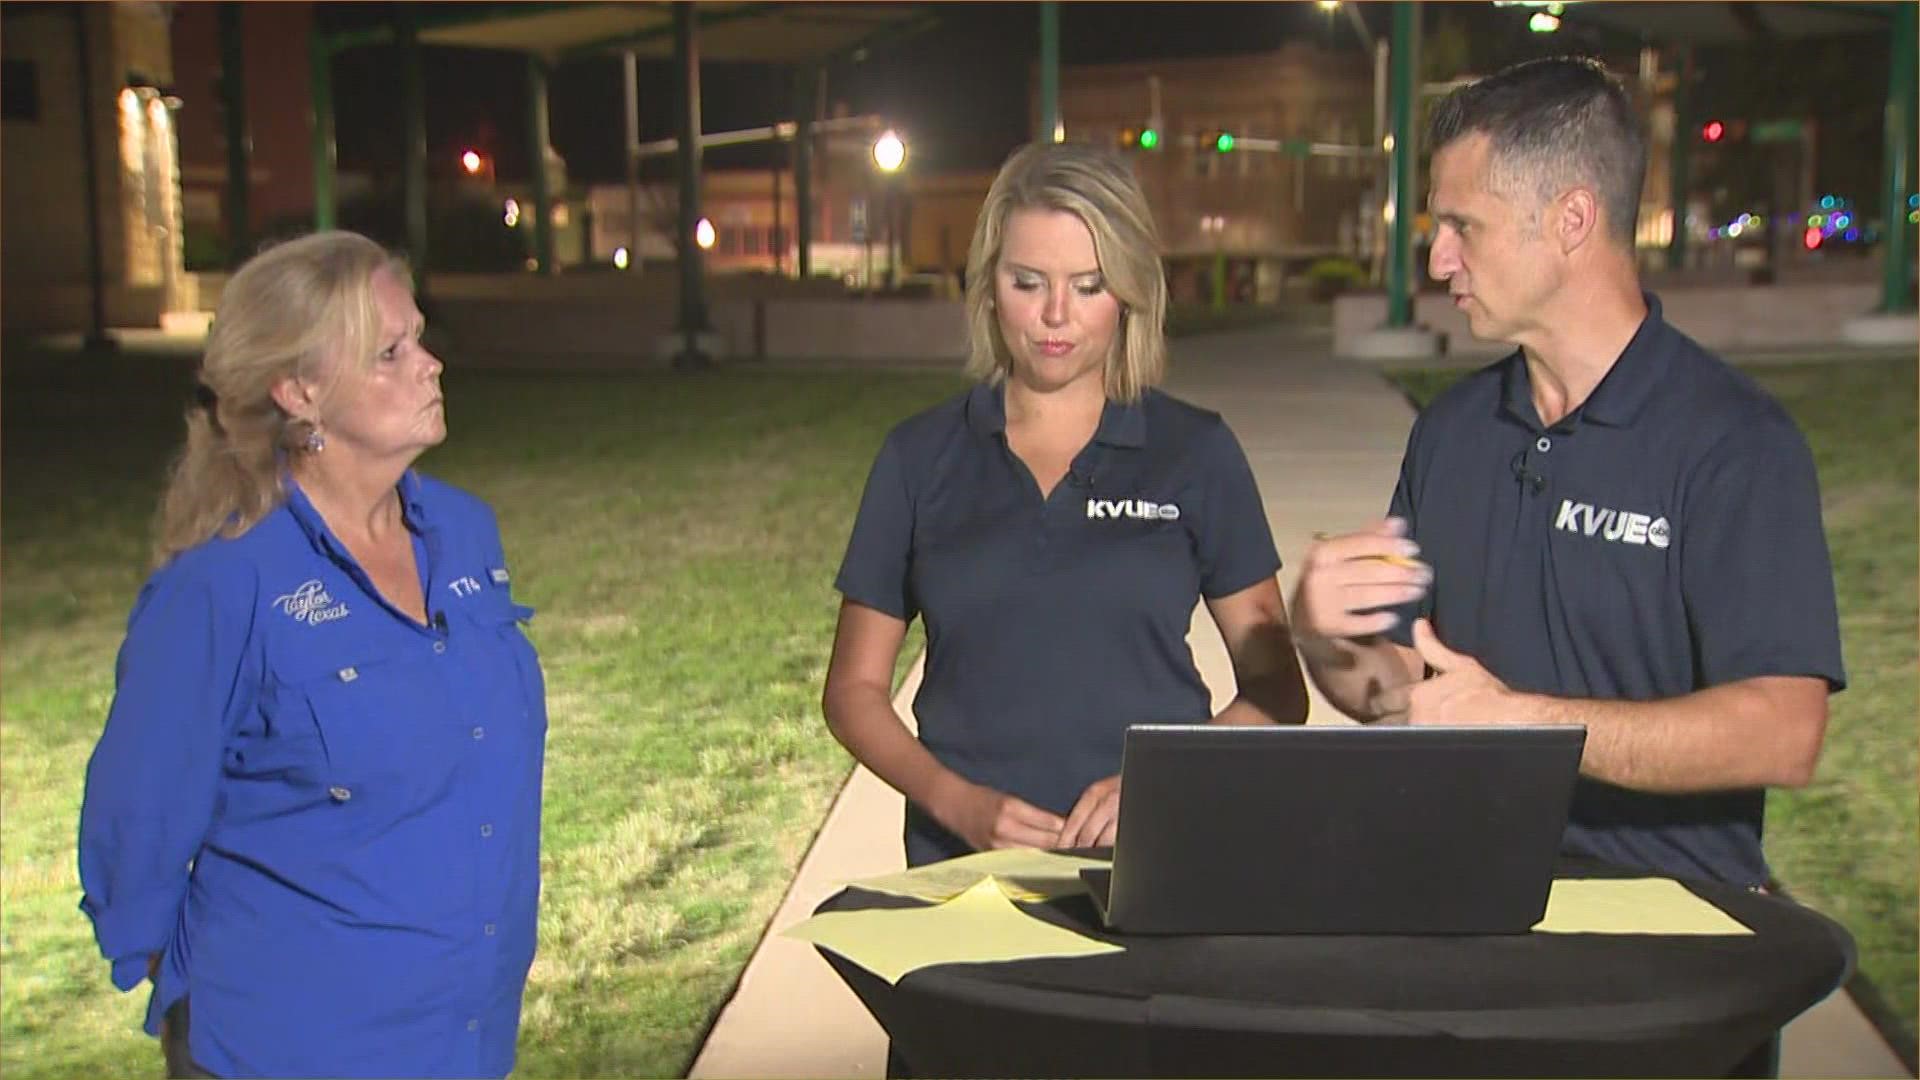 Join the KVUE Daybreak team as they hit the road in Taylor, Texas! Hannah Rucker and Rob Evans discuss the growth that Taylor's airport is seeing.